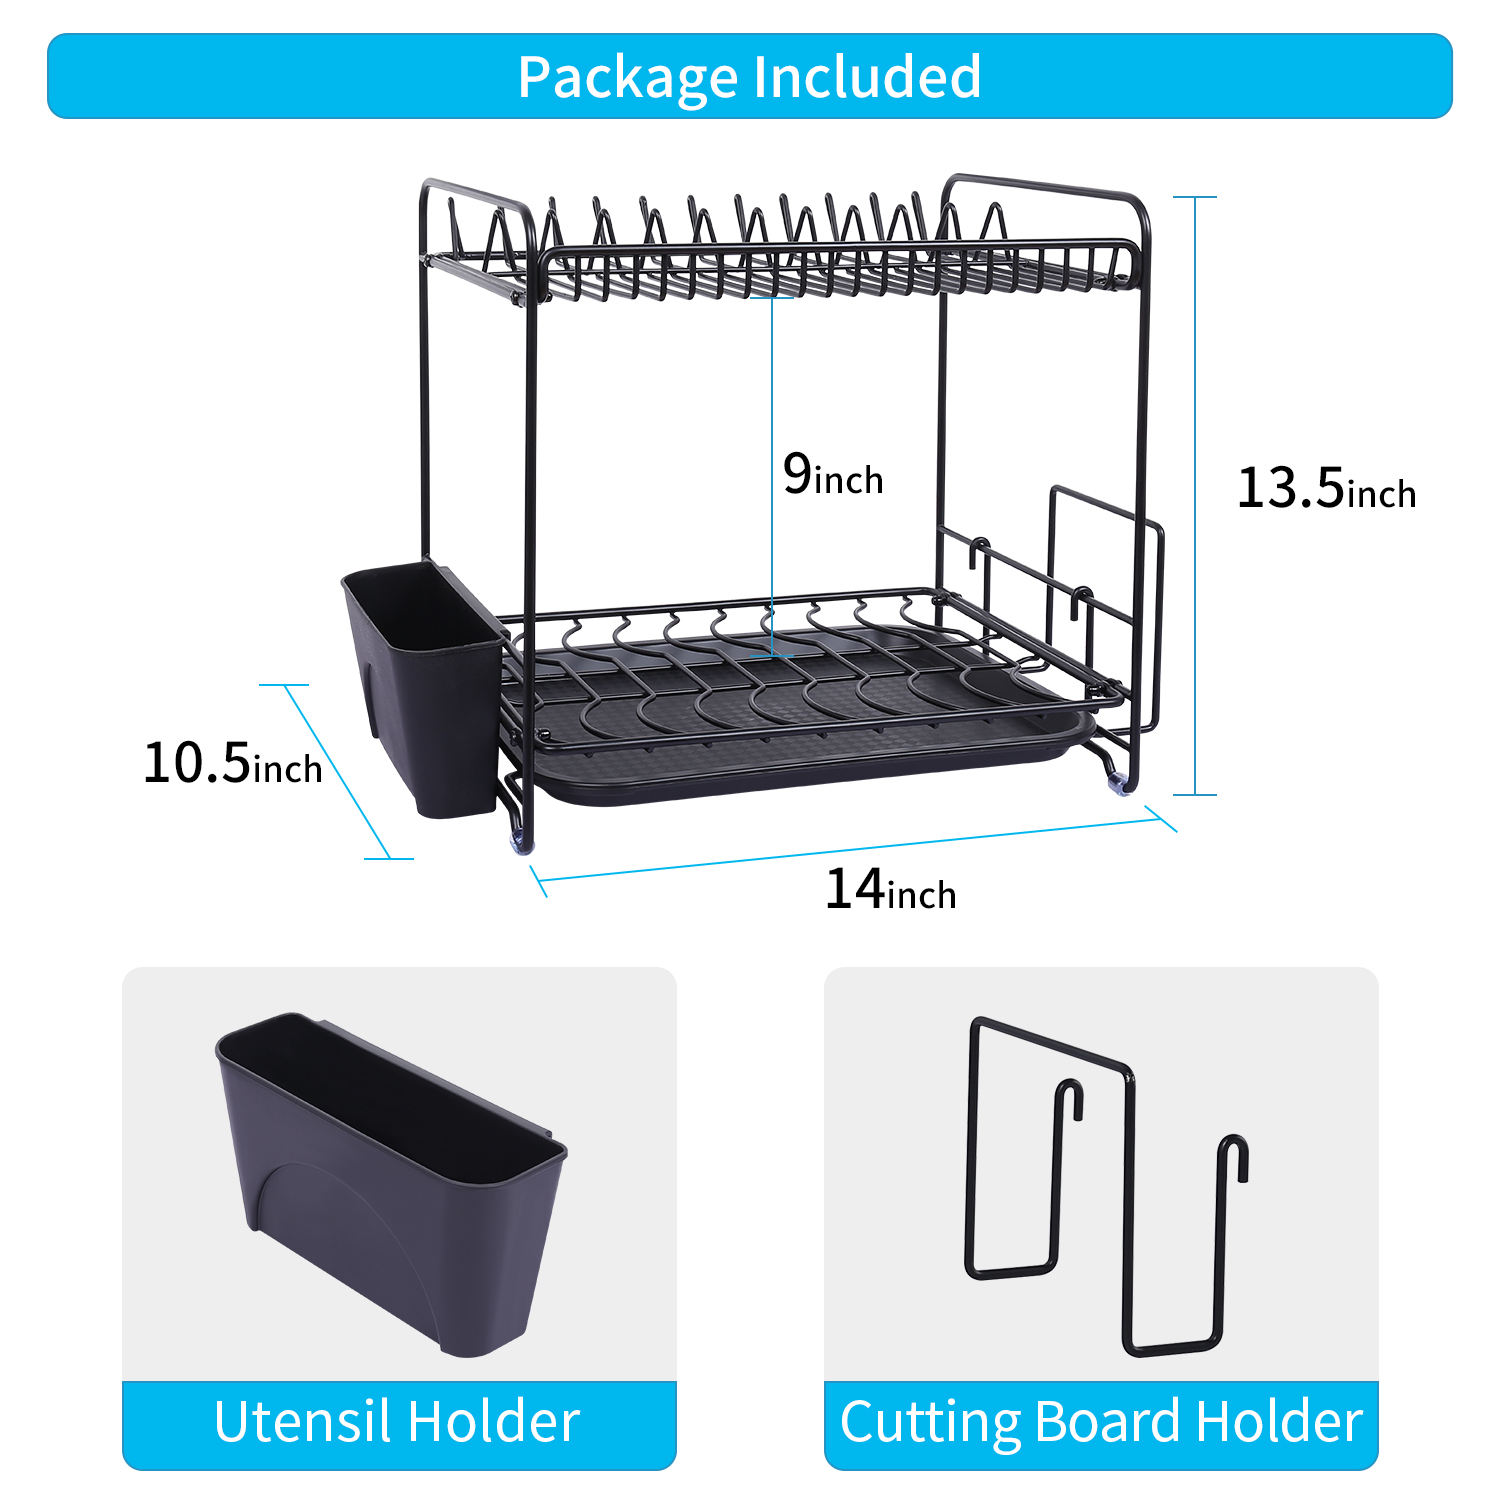 Indoor Household Multifunction Kitchen Holders Stainless Steel Dish Rack with Drainboard Dish Rack Drainer